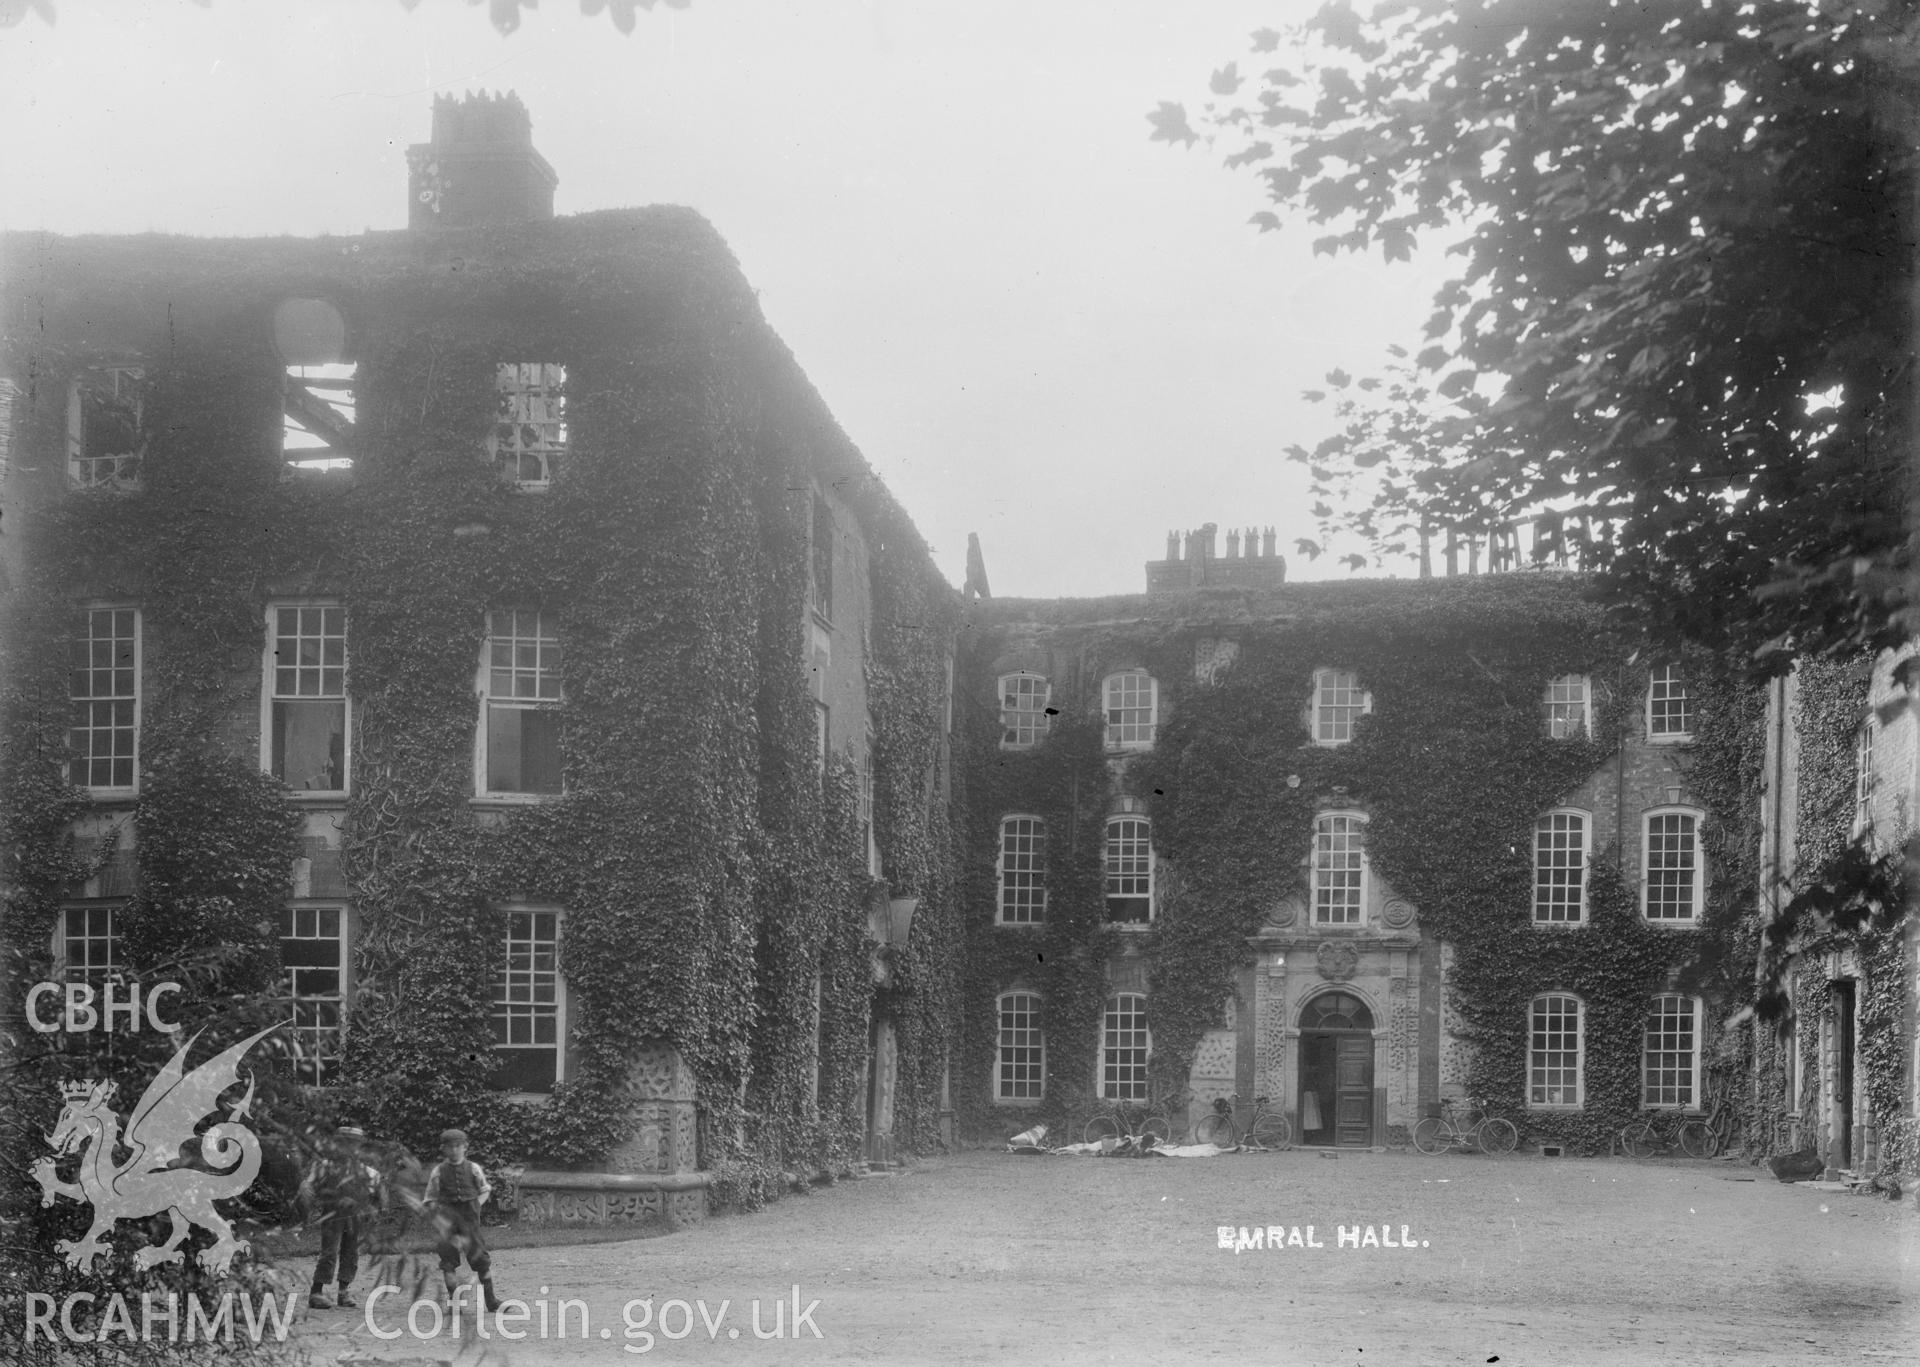 Black and white nitrate negative showing exterior view of Emral Hall.